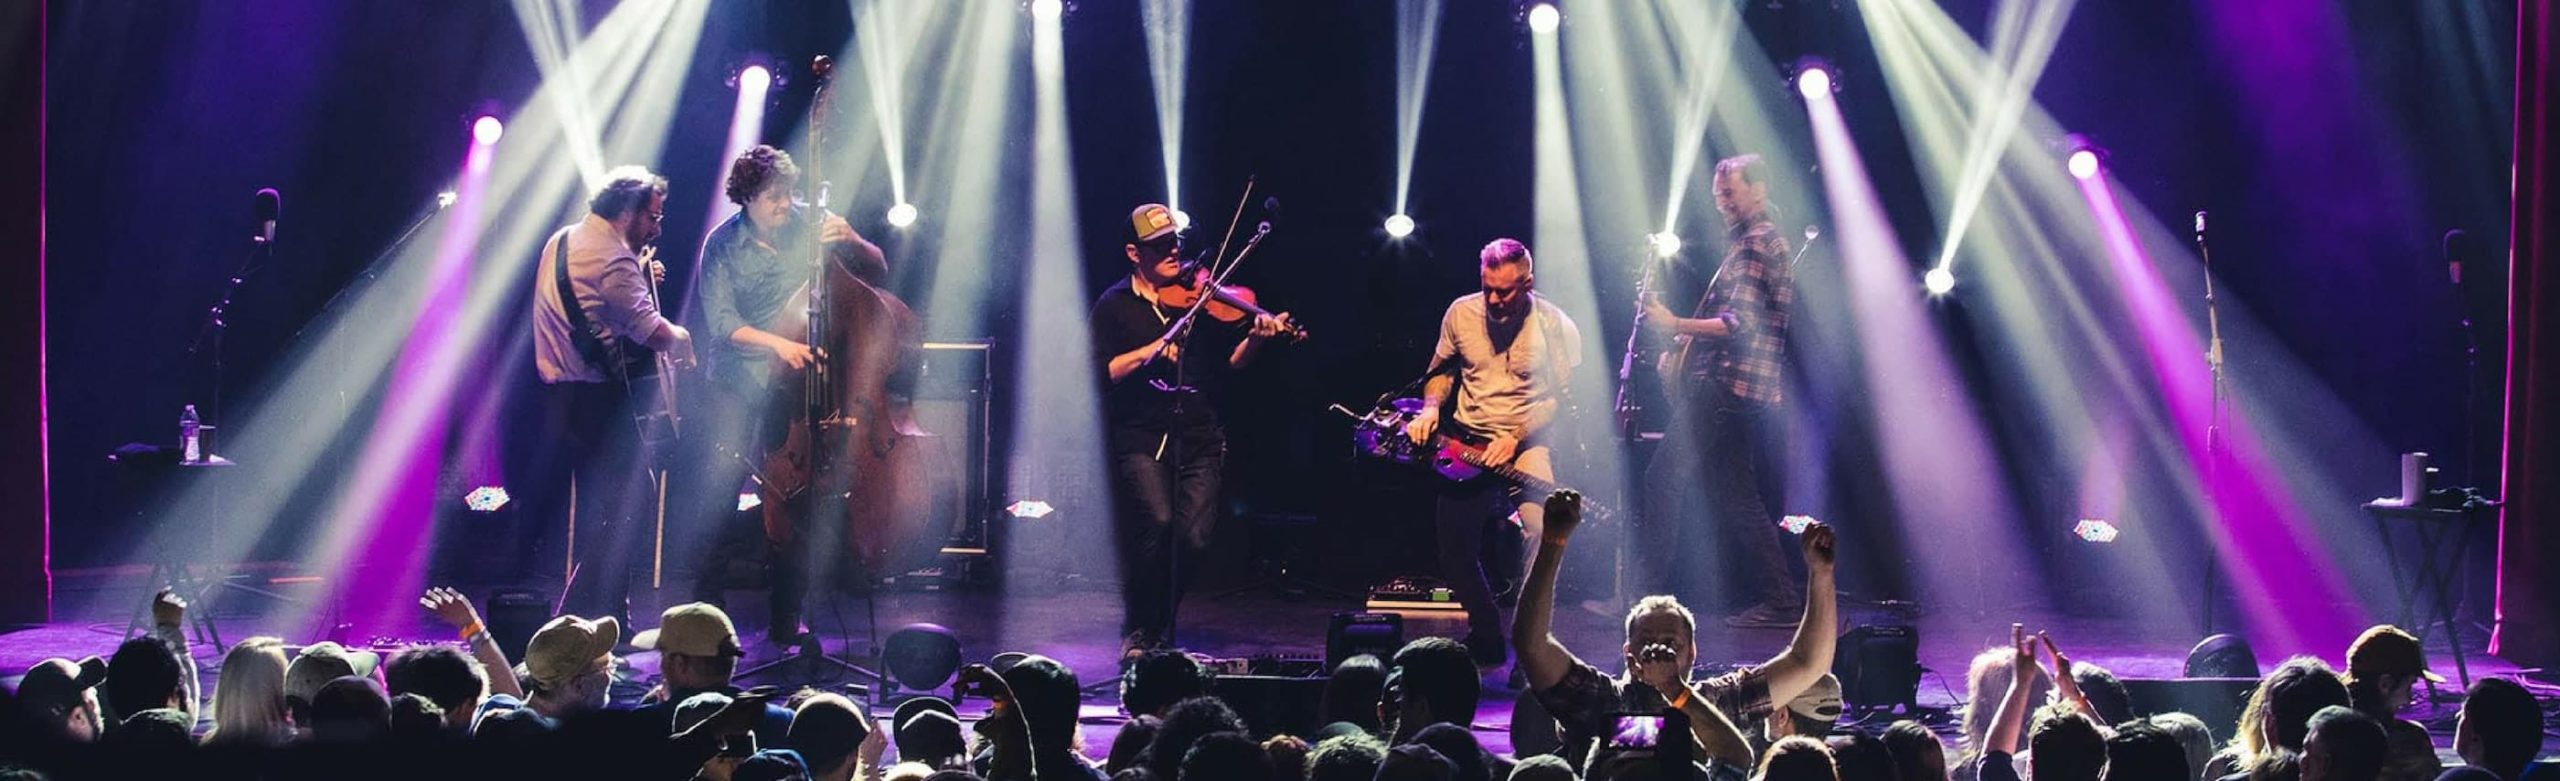 Event Info: The Infamous Stringdusters at The Wilma 2019 Image